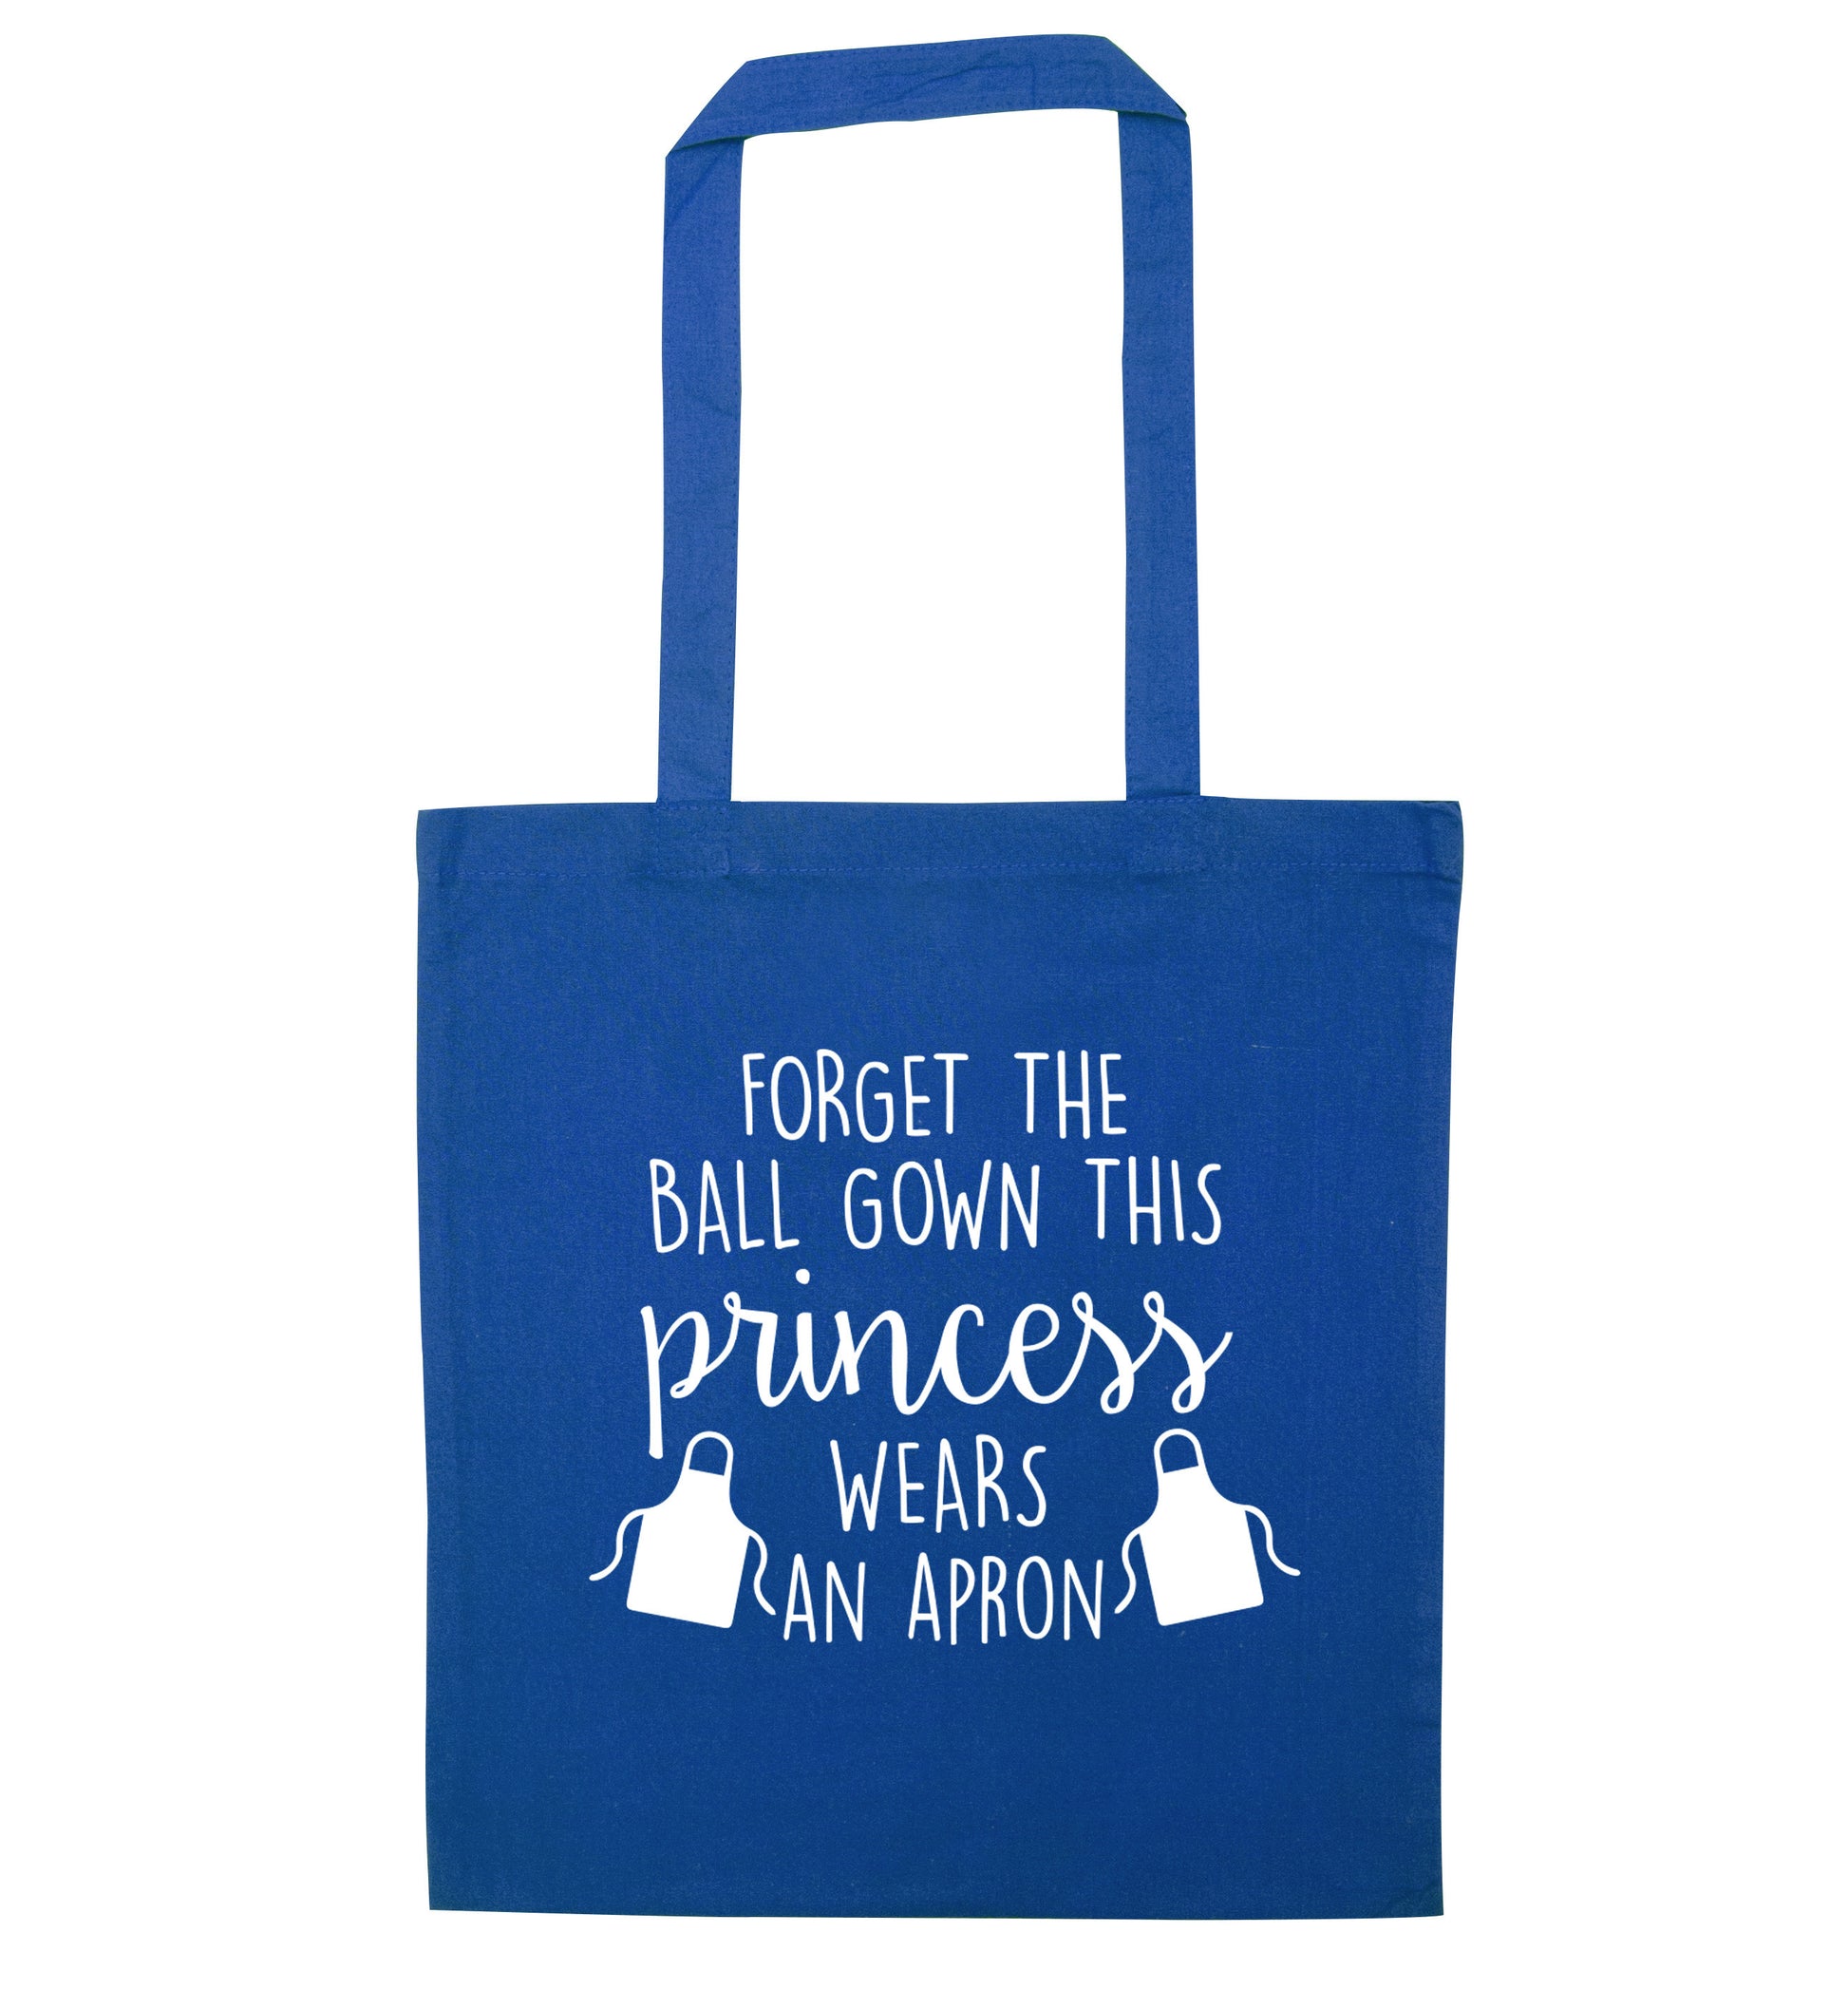 Forget the ball gown this princess wears an apron blue tote bag